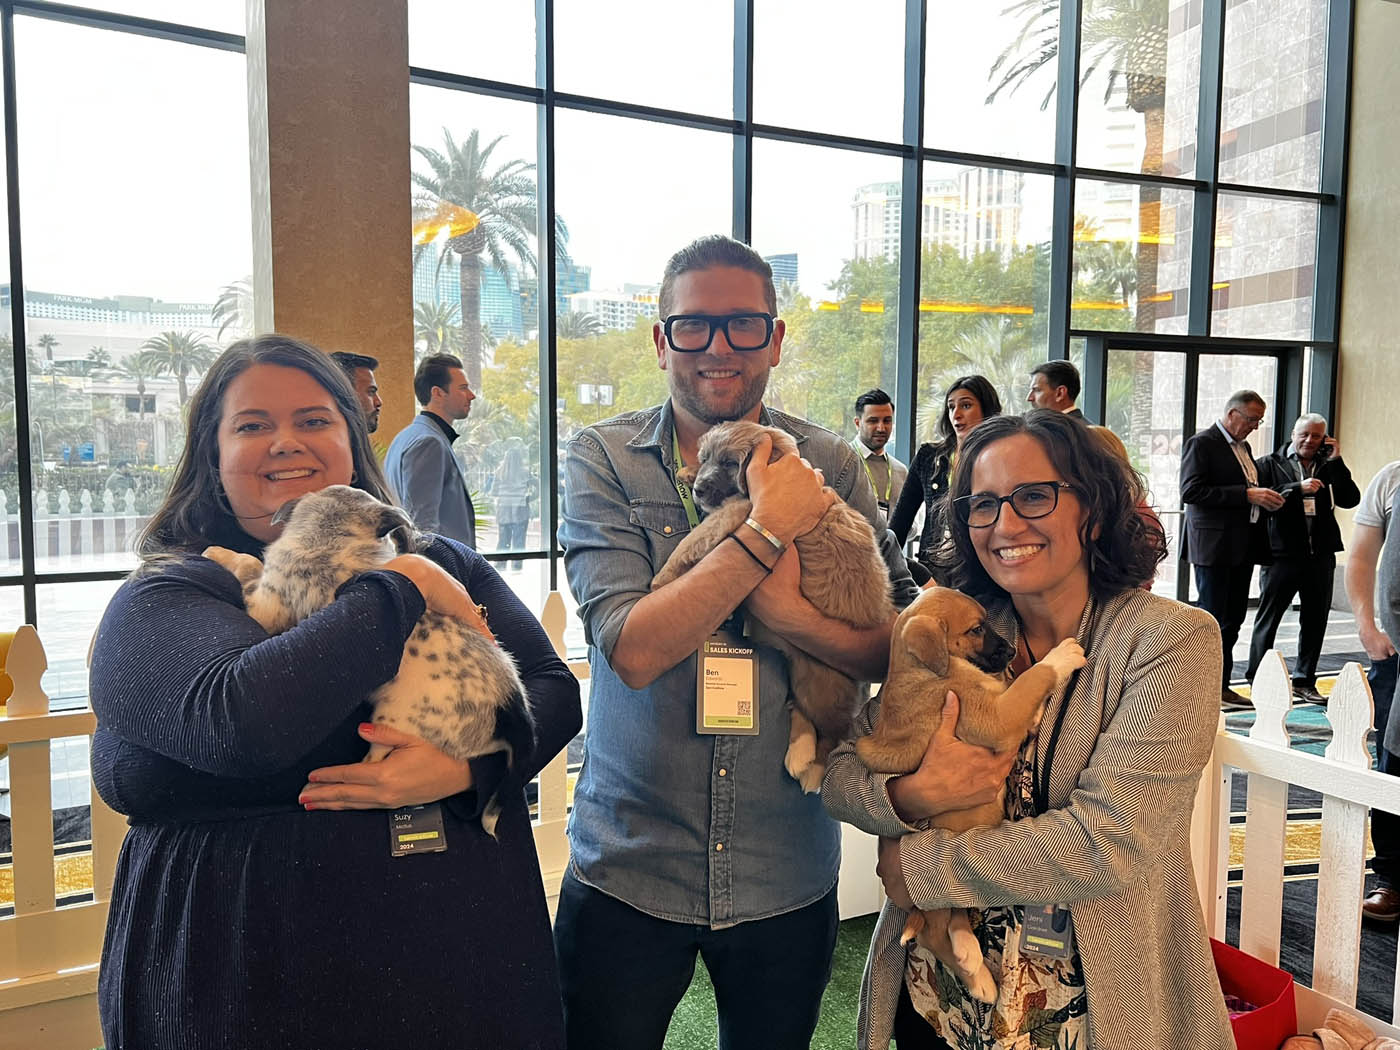 A group of people holding adorable puppies and feeling the benefits of Puppy Love added to their Silicon Valley / Bay Area company wellness programs.